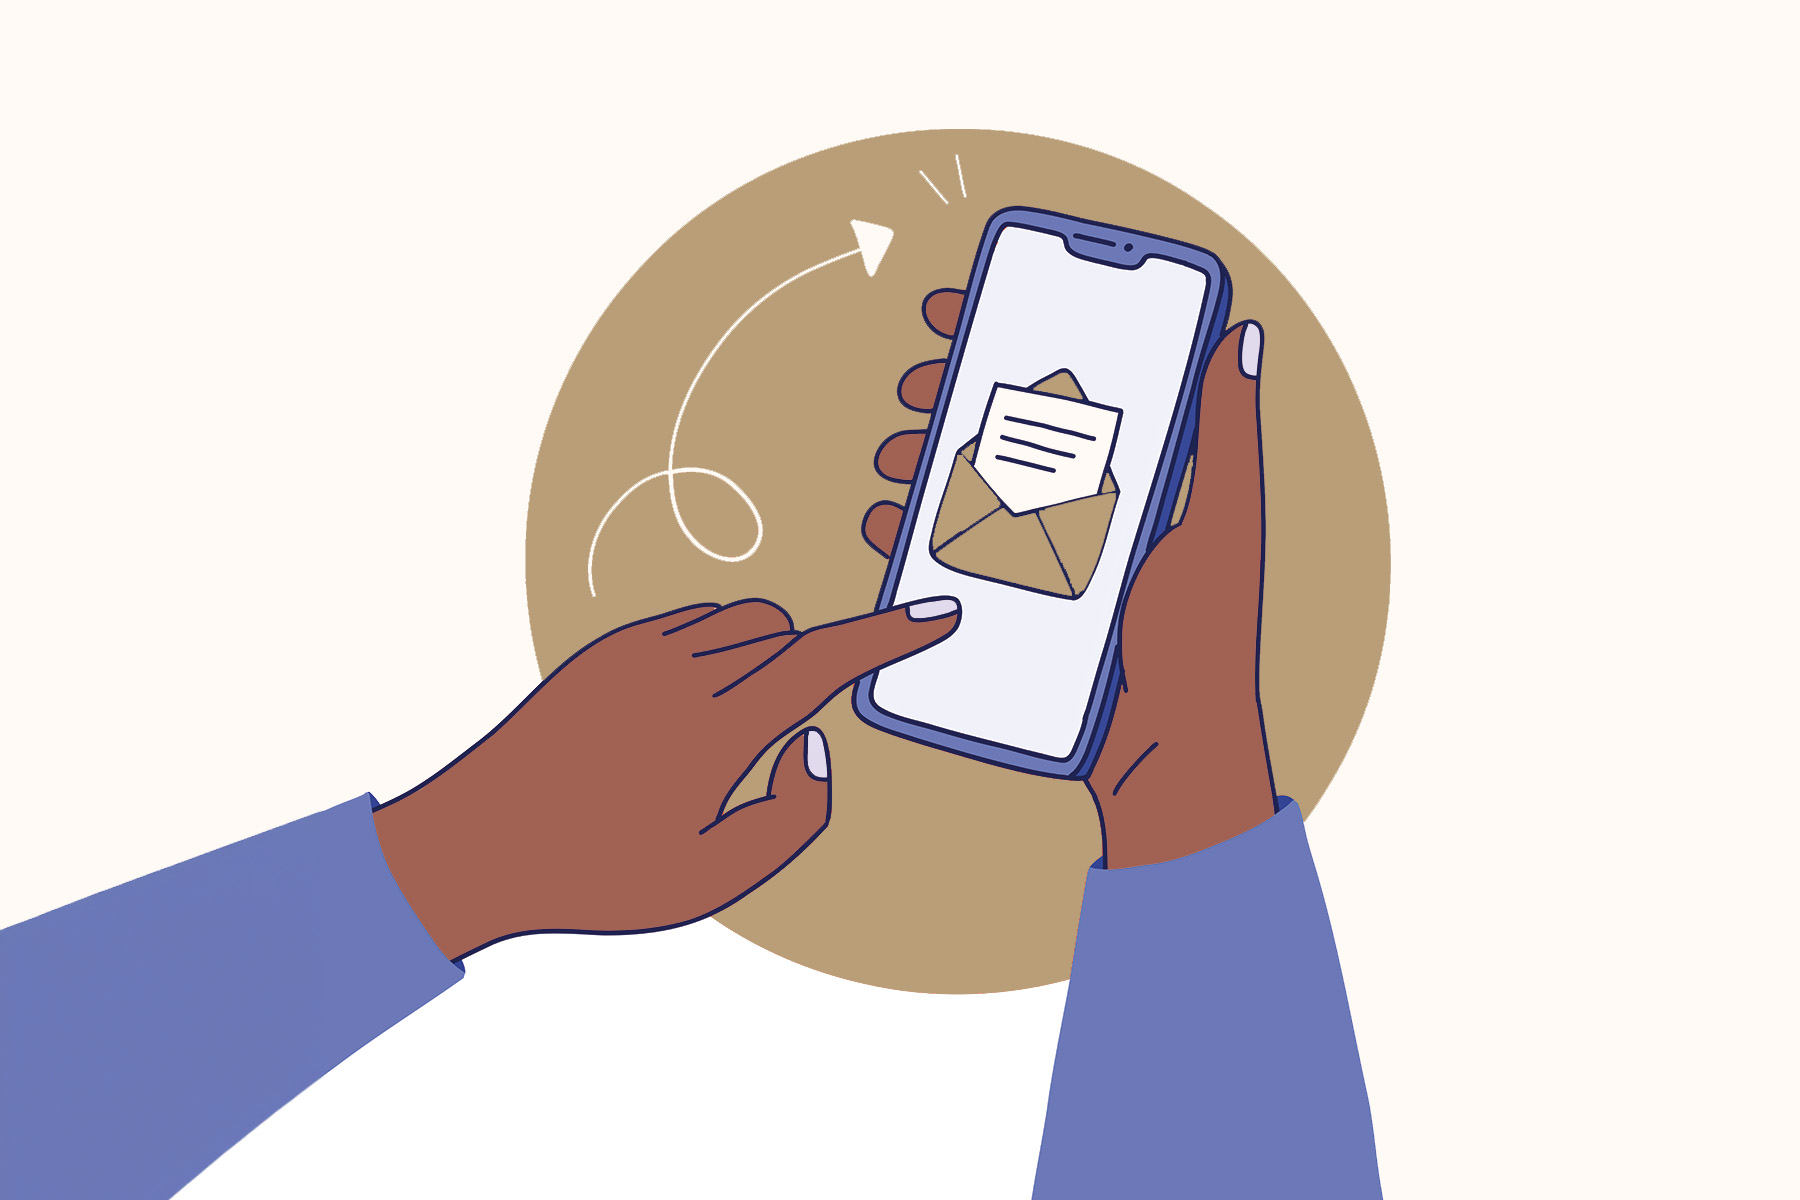 Illustration of a person tapping on a phone screen on which a letter appears.